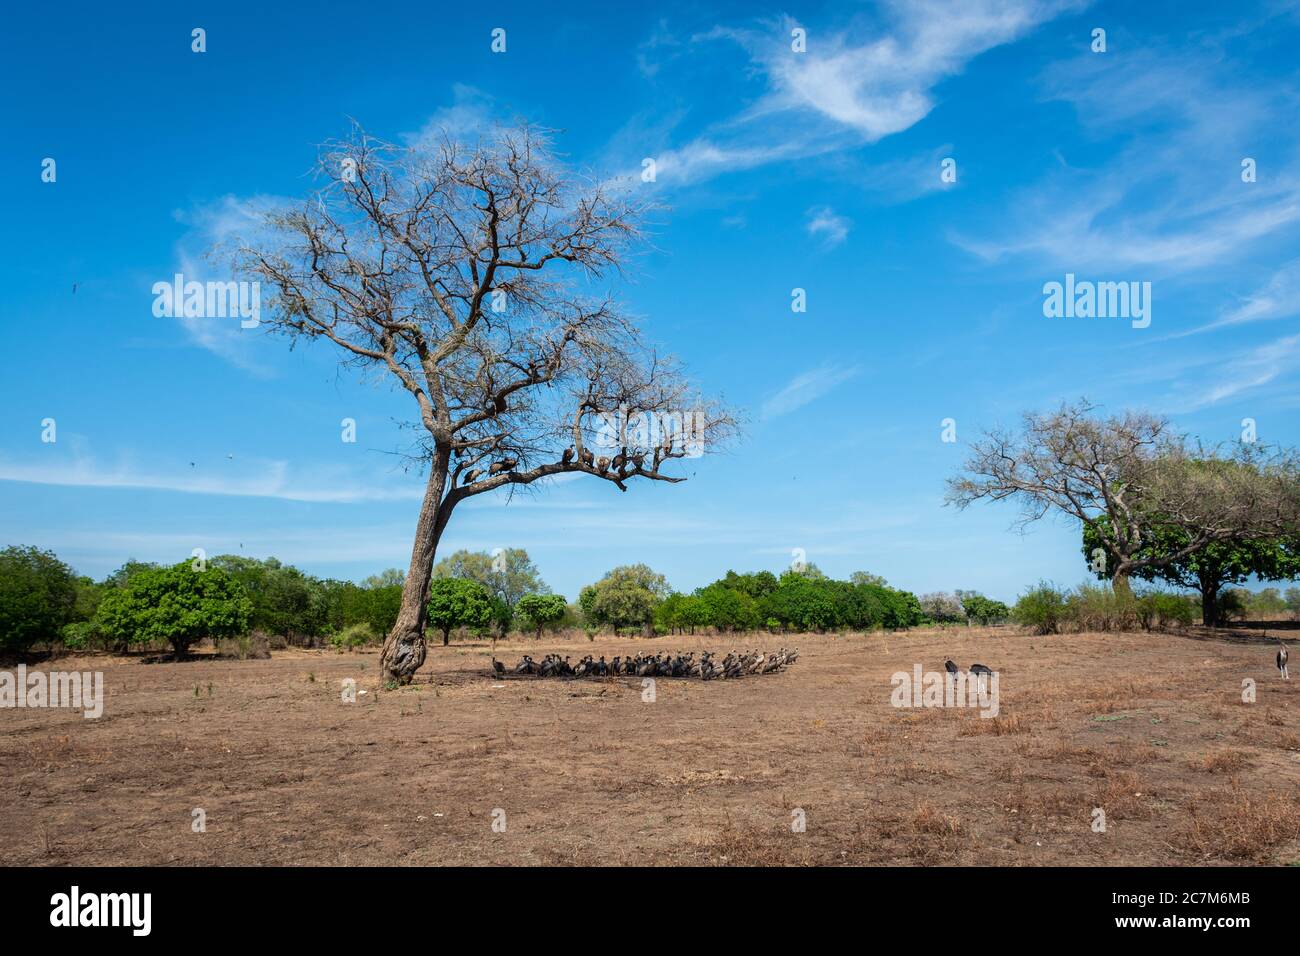 Group of Vultures eating under a tree. Photo taken in South Luangwa, Zambia. Stock Photo